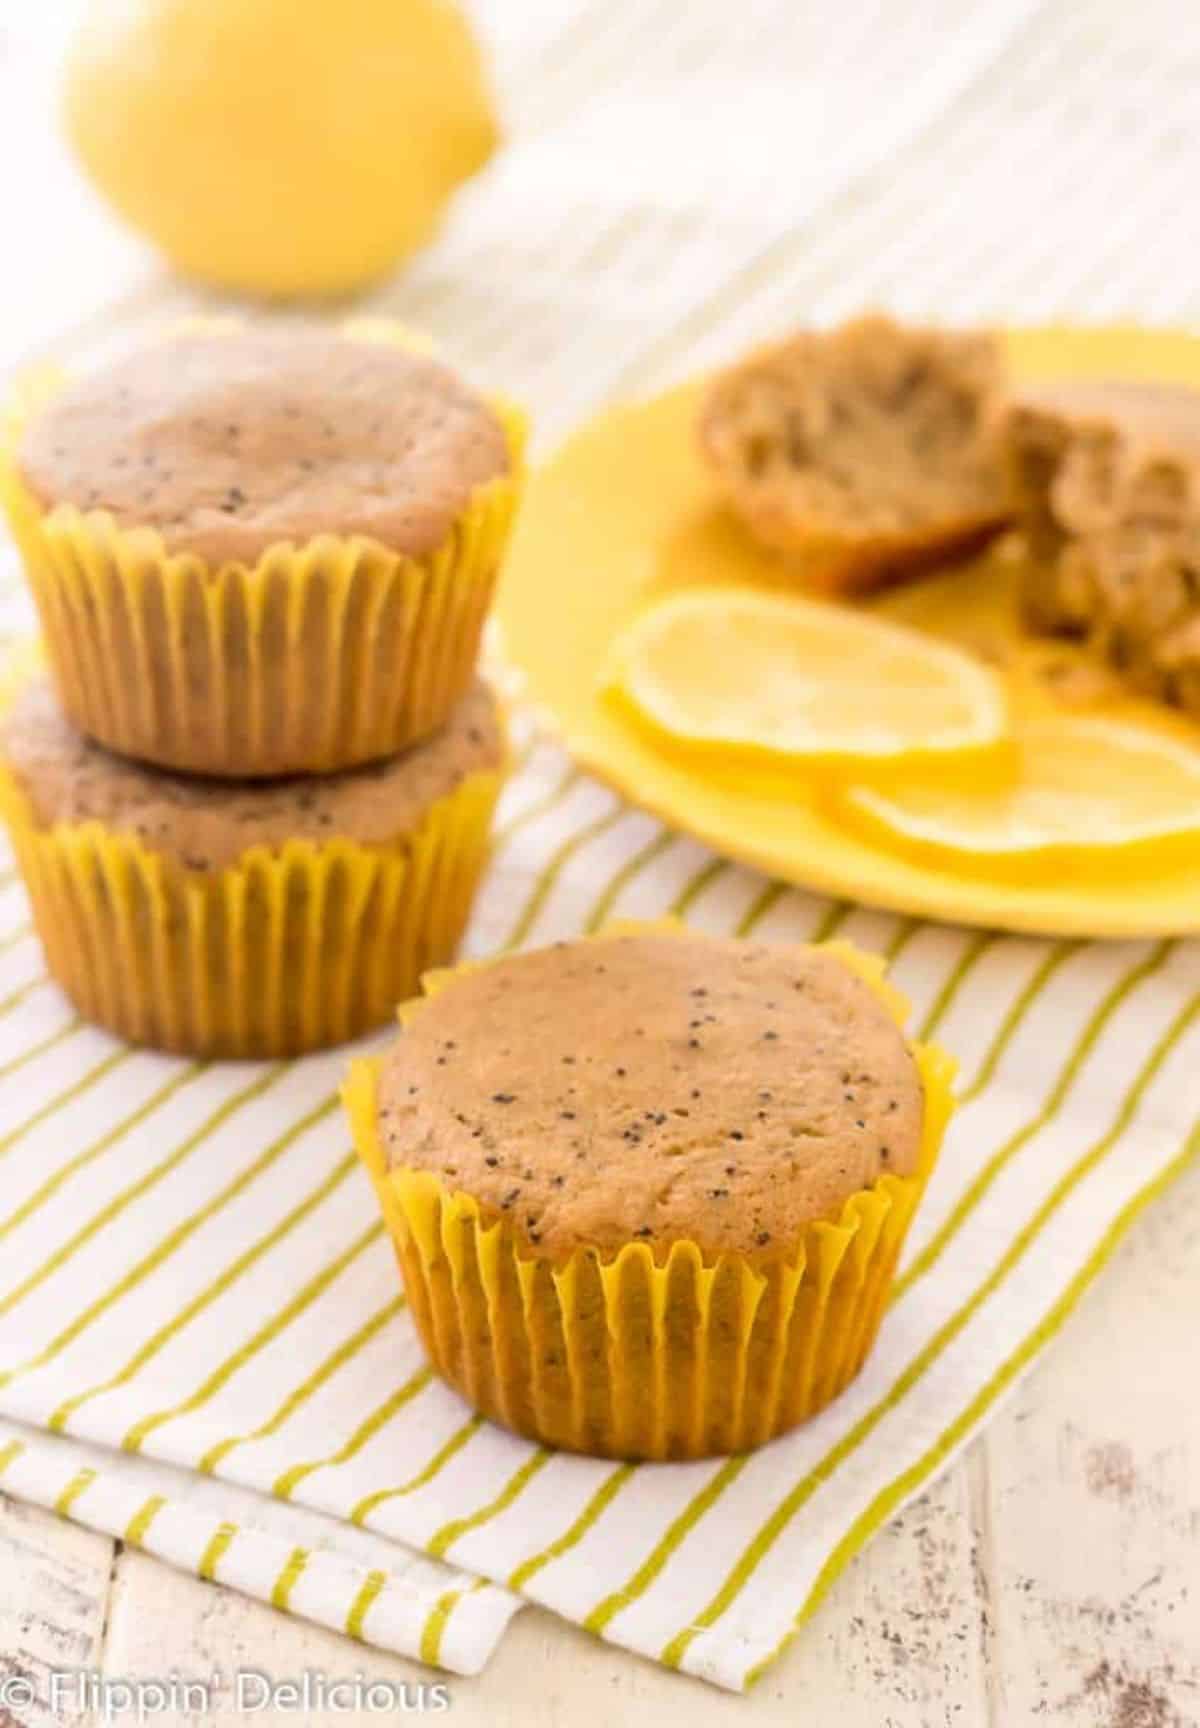 Delicious Almond Flour Lemon Poppy Seed Muffins on a table.